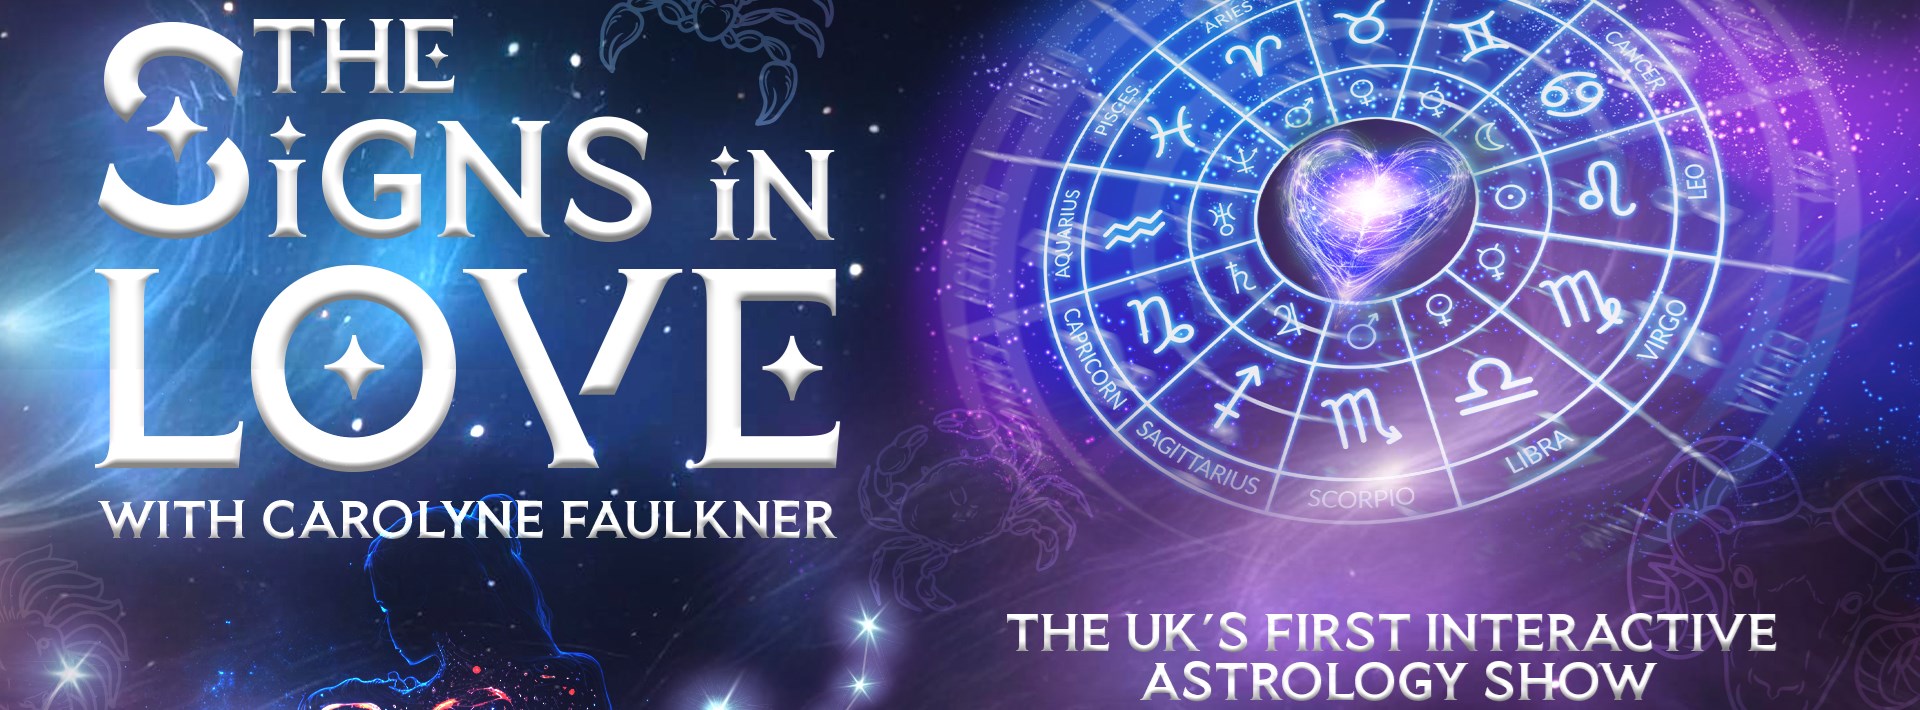 The Signs in Love with Carolyne Faulkner